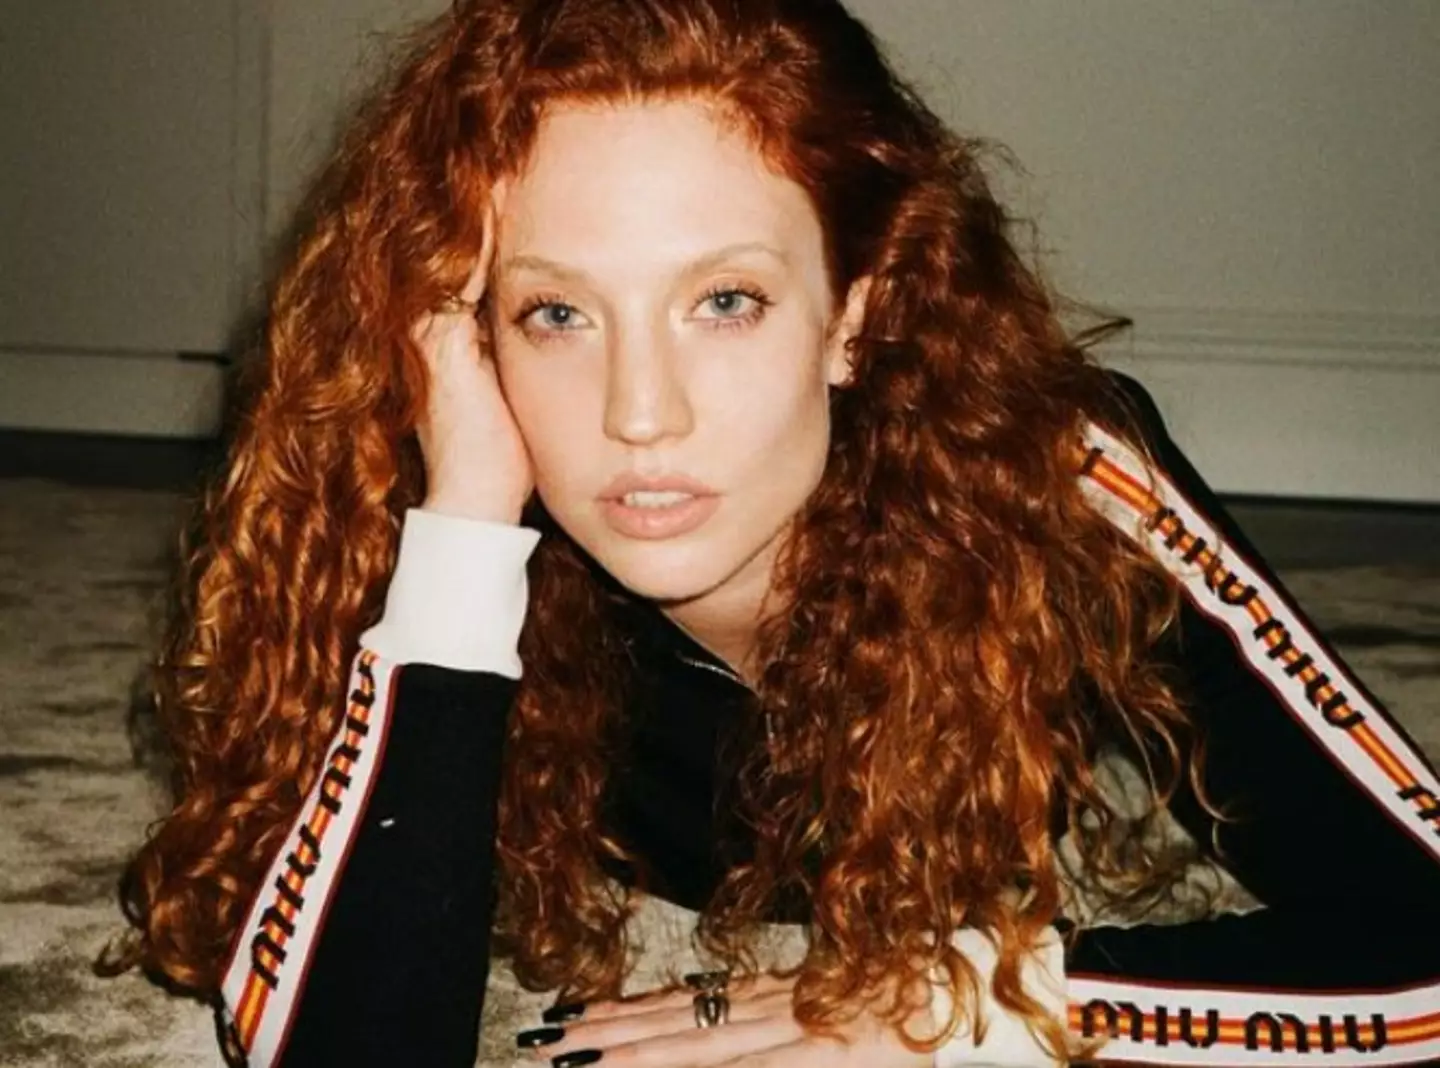 Jess Glynne has teased fans with a snippet of a new single.